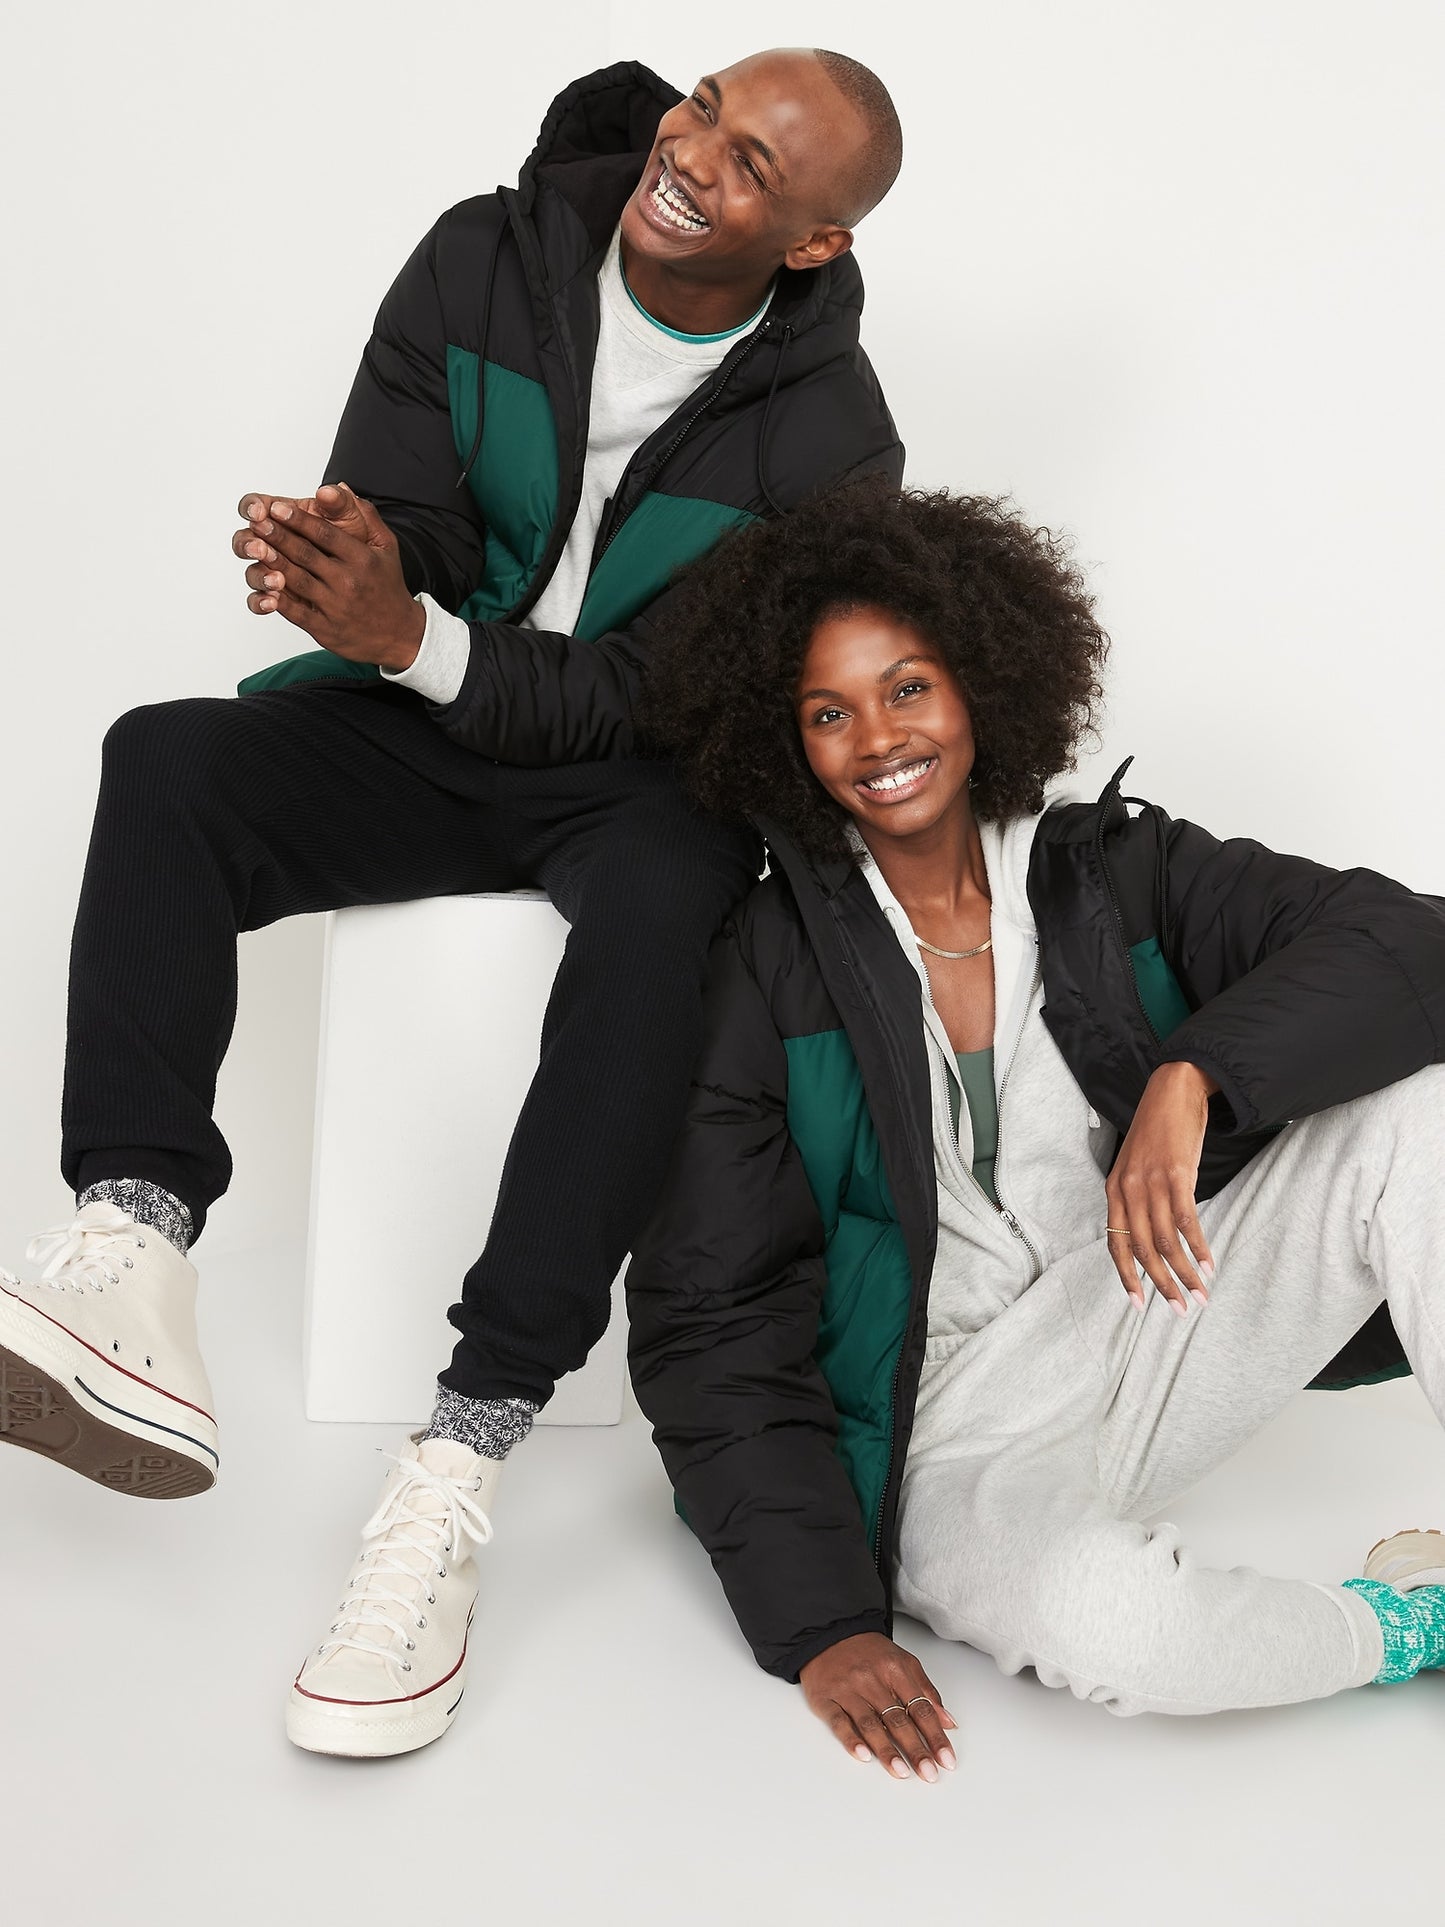 ON Frost-Free Water-Resistant Hooded Gender-Neutral Puffer Jacket For Adults - Botanical Green